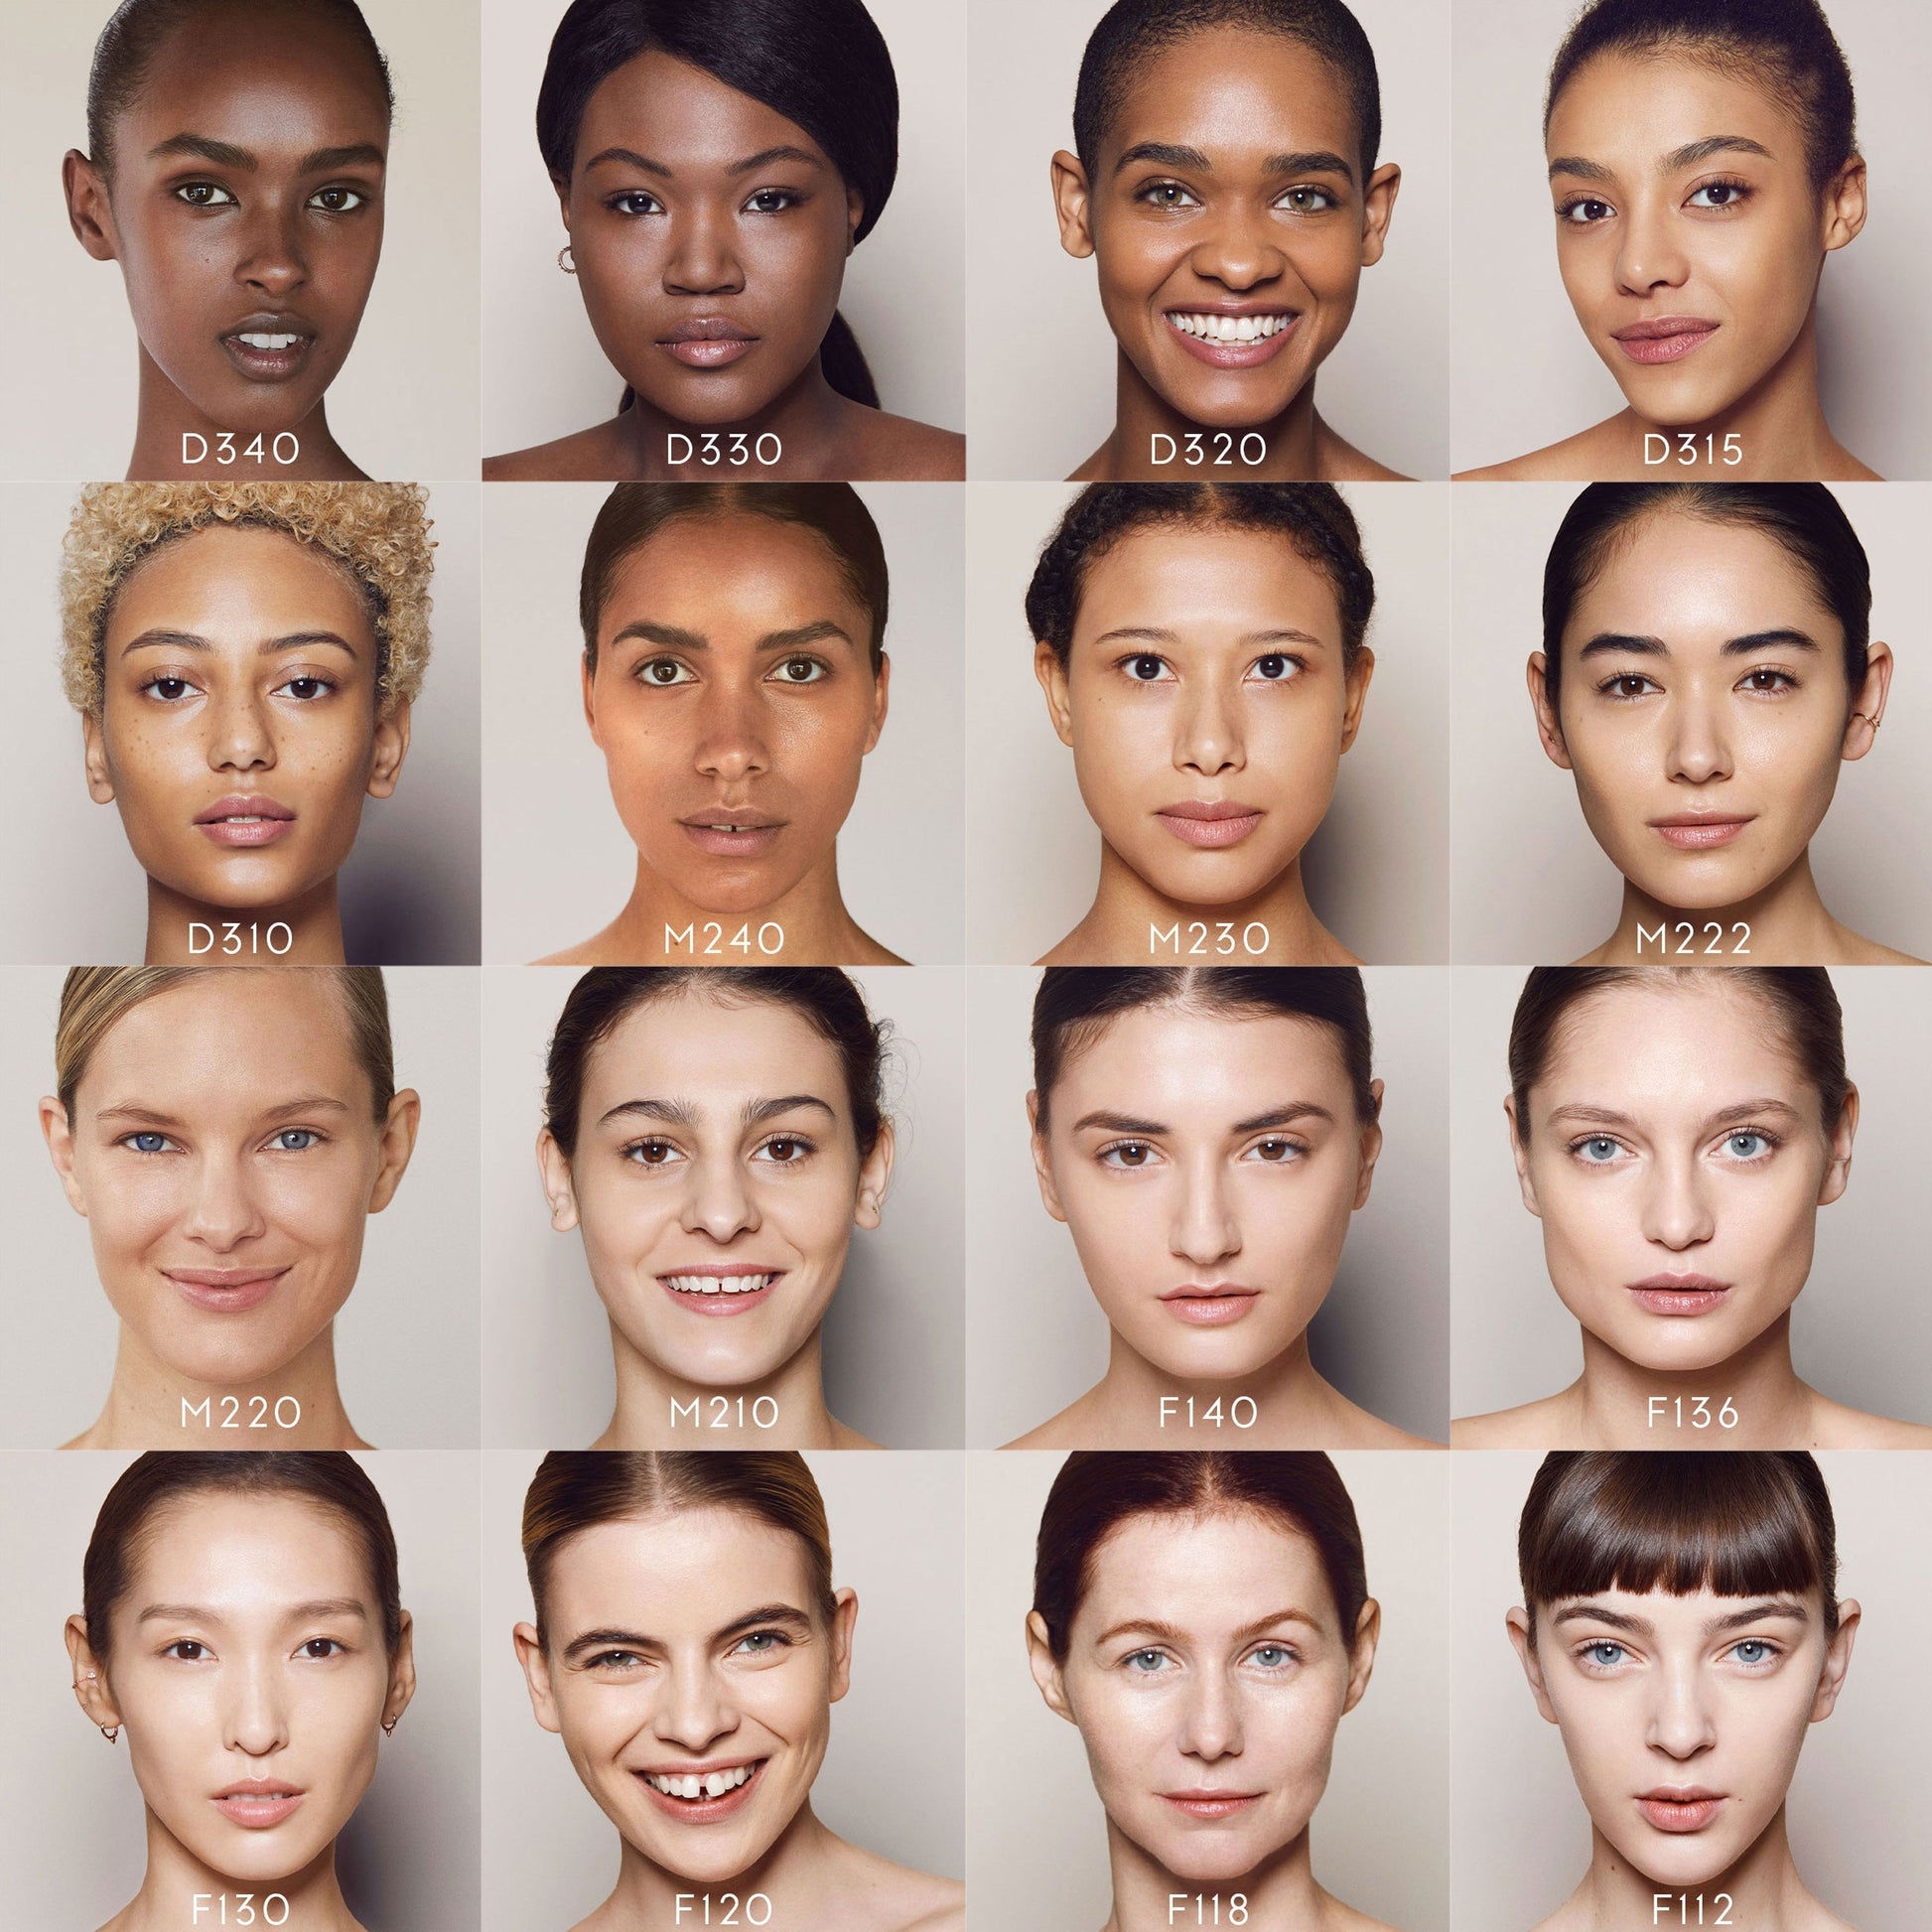 close ups of various faces of different skin tones, from dark to light with the foundation shades they are wearing. m222 is the eighth-darkest shade shown. 